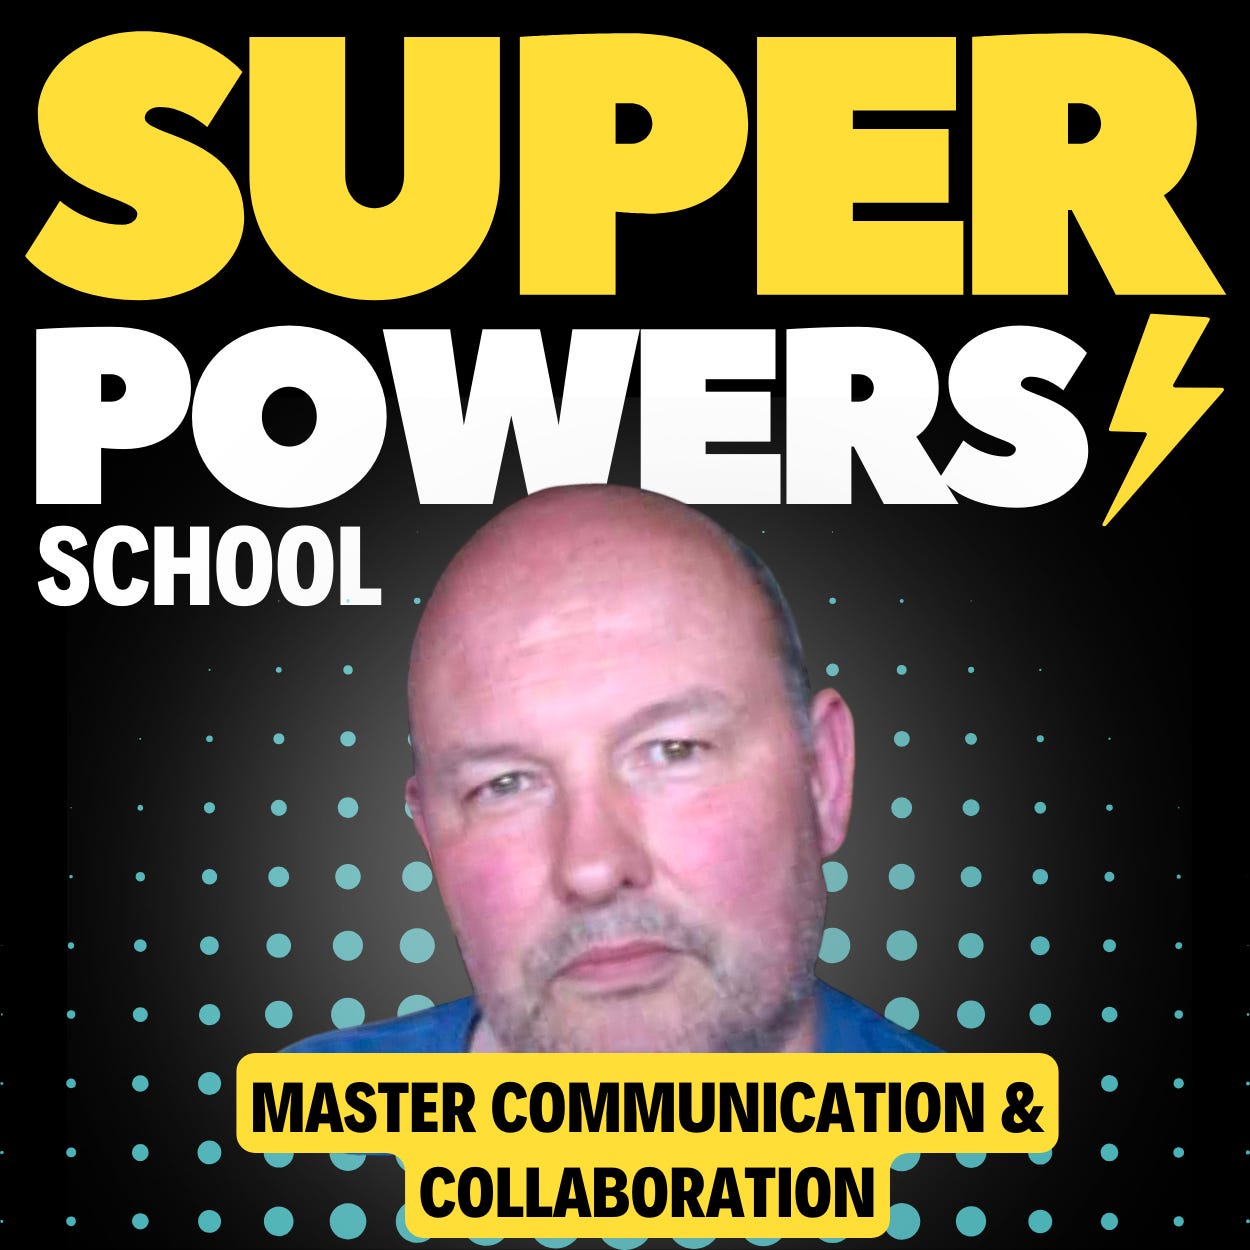 How can IT professionals master communication and collaboration - Angus McIlwraith (Author) - Presenting E137